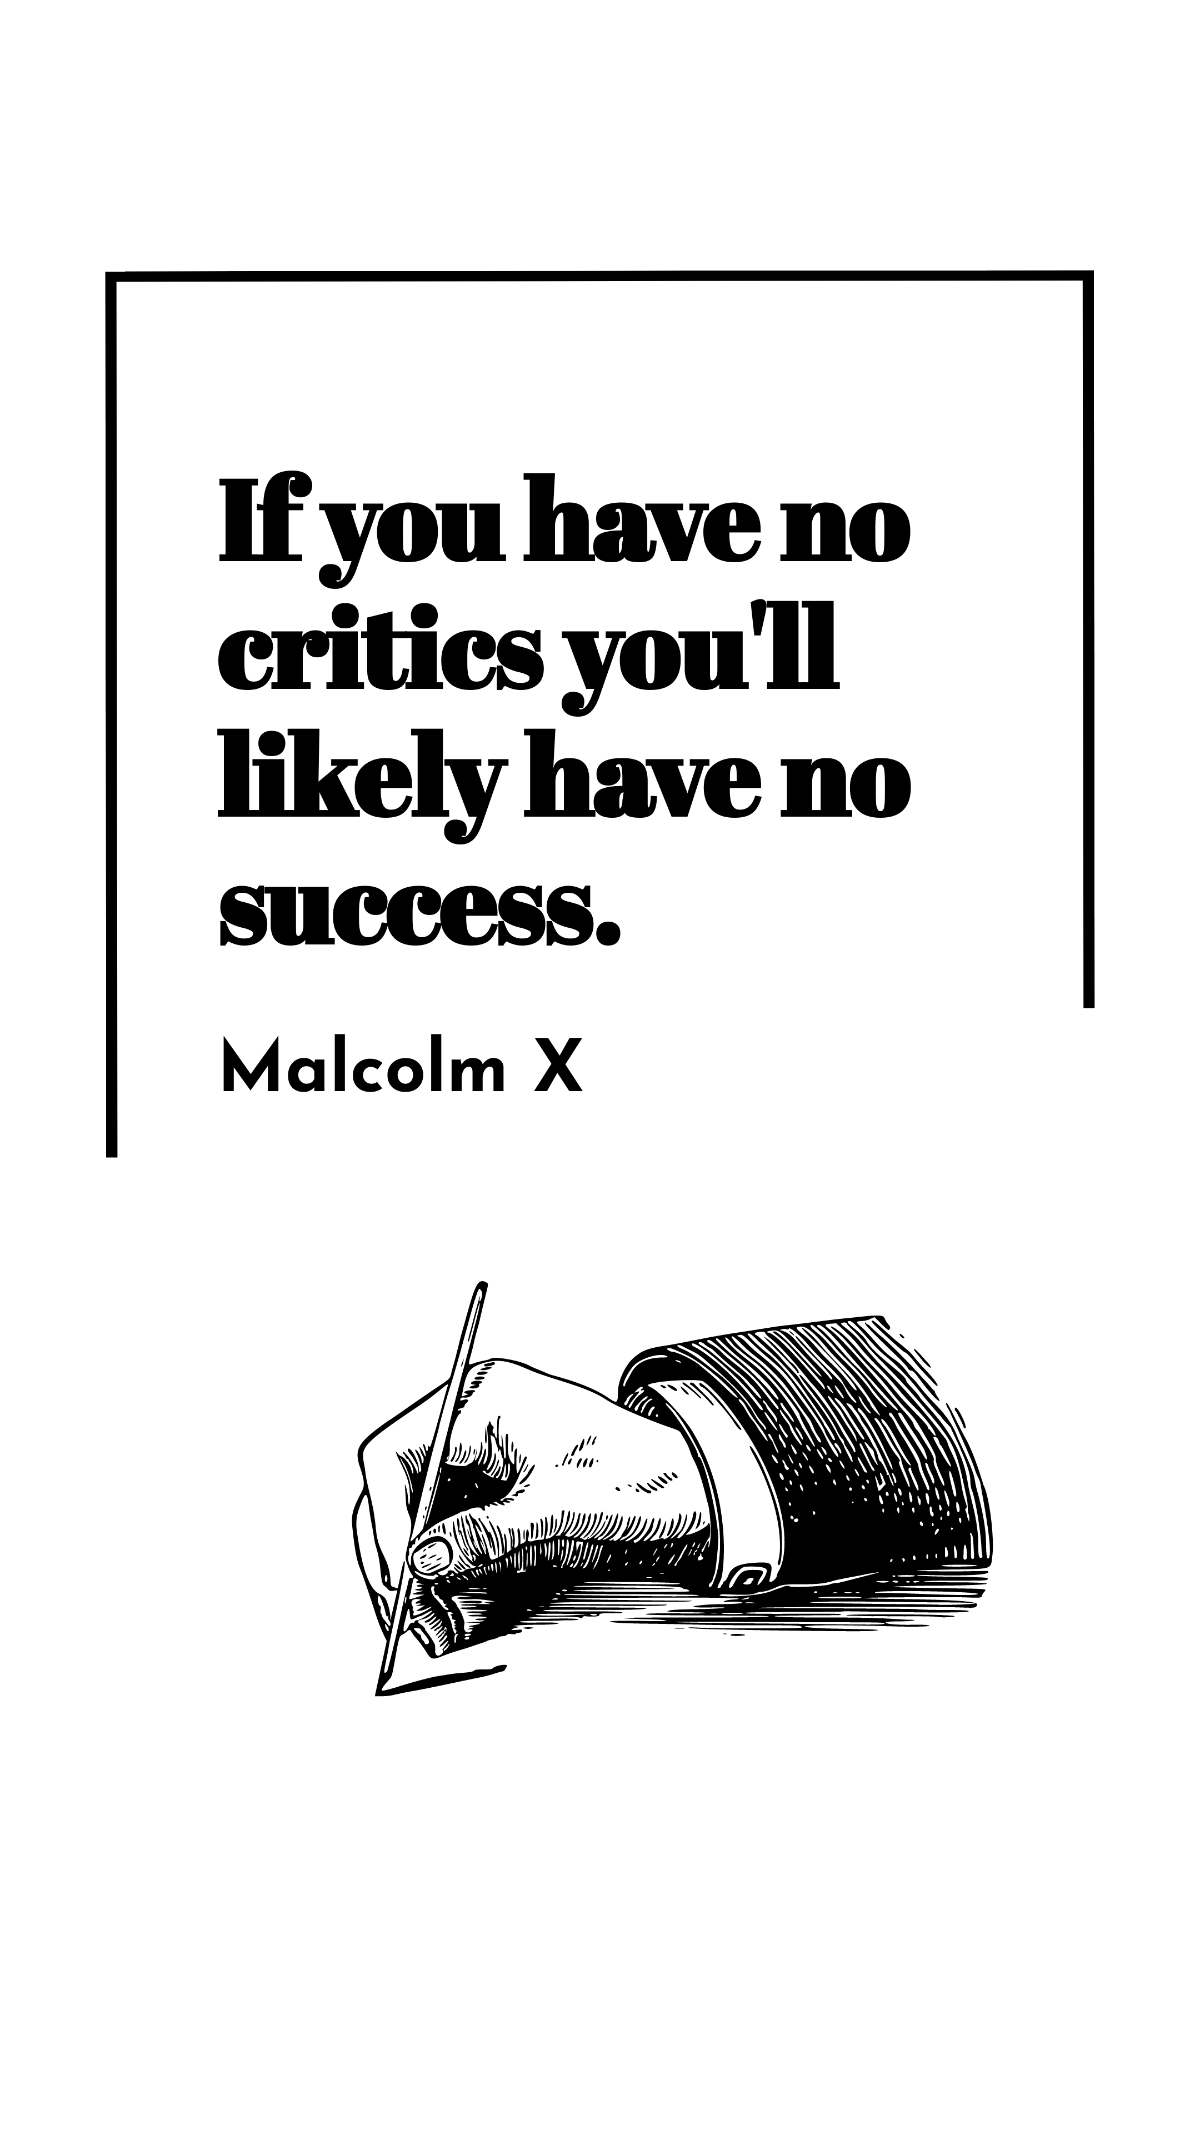 Free Malcolm X - If you have no critics you'll likely have no success. Template